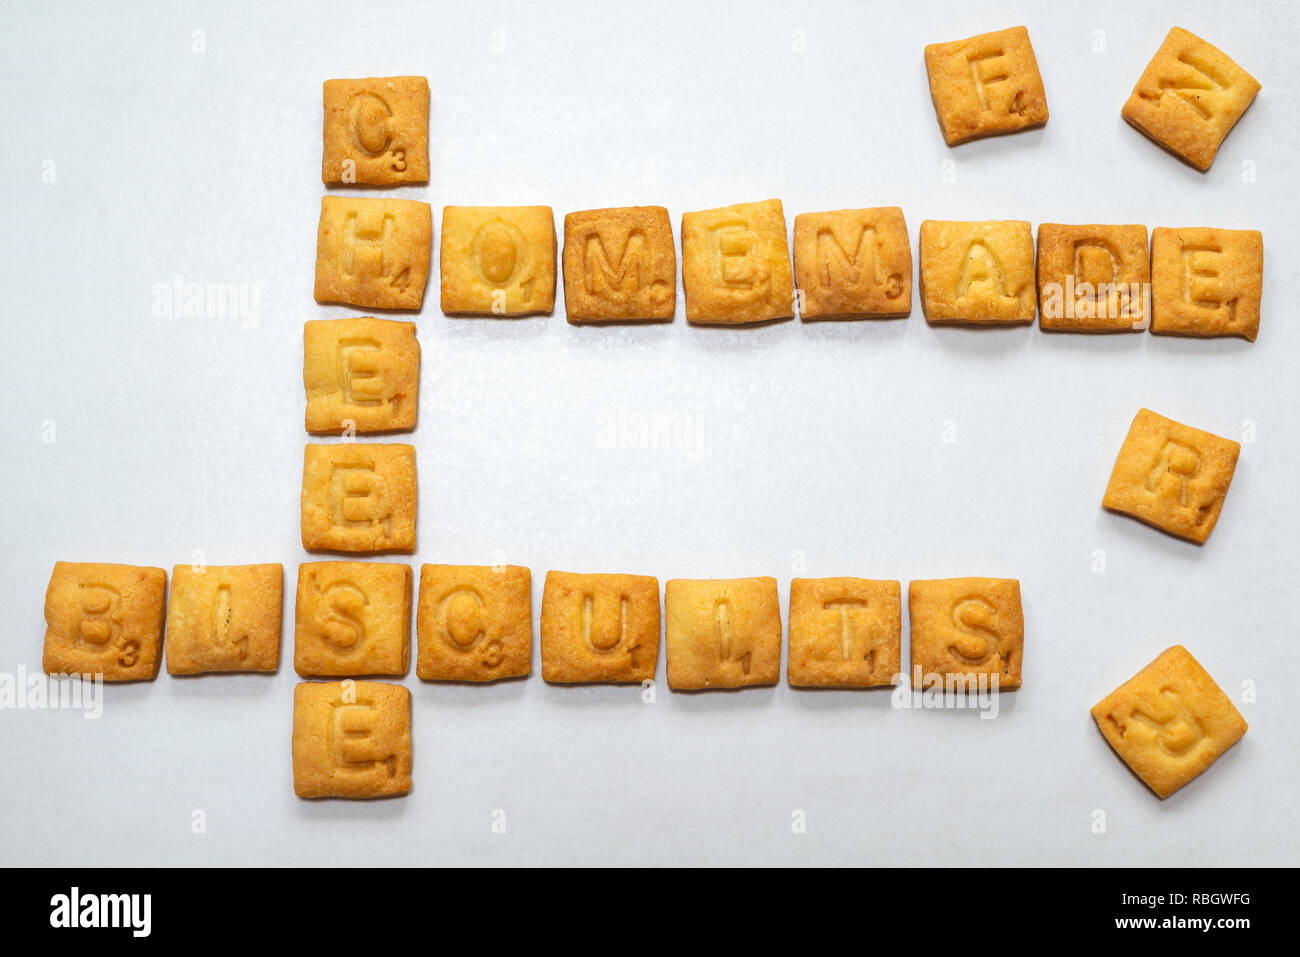 Homemade cheese biscuits - scrabble words made from biscuits / cookies. Stock Photo